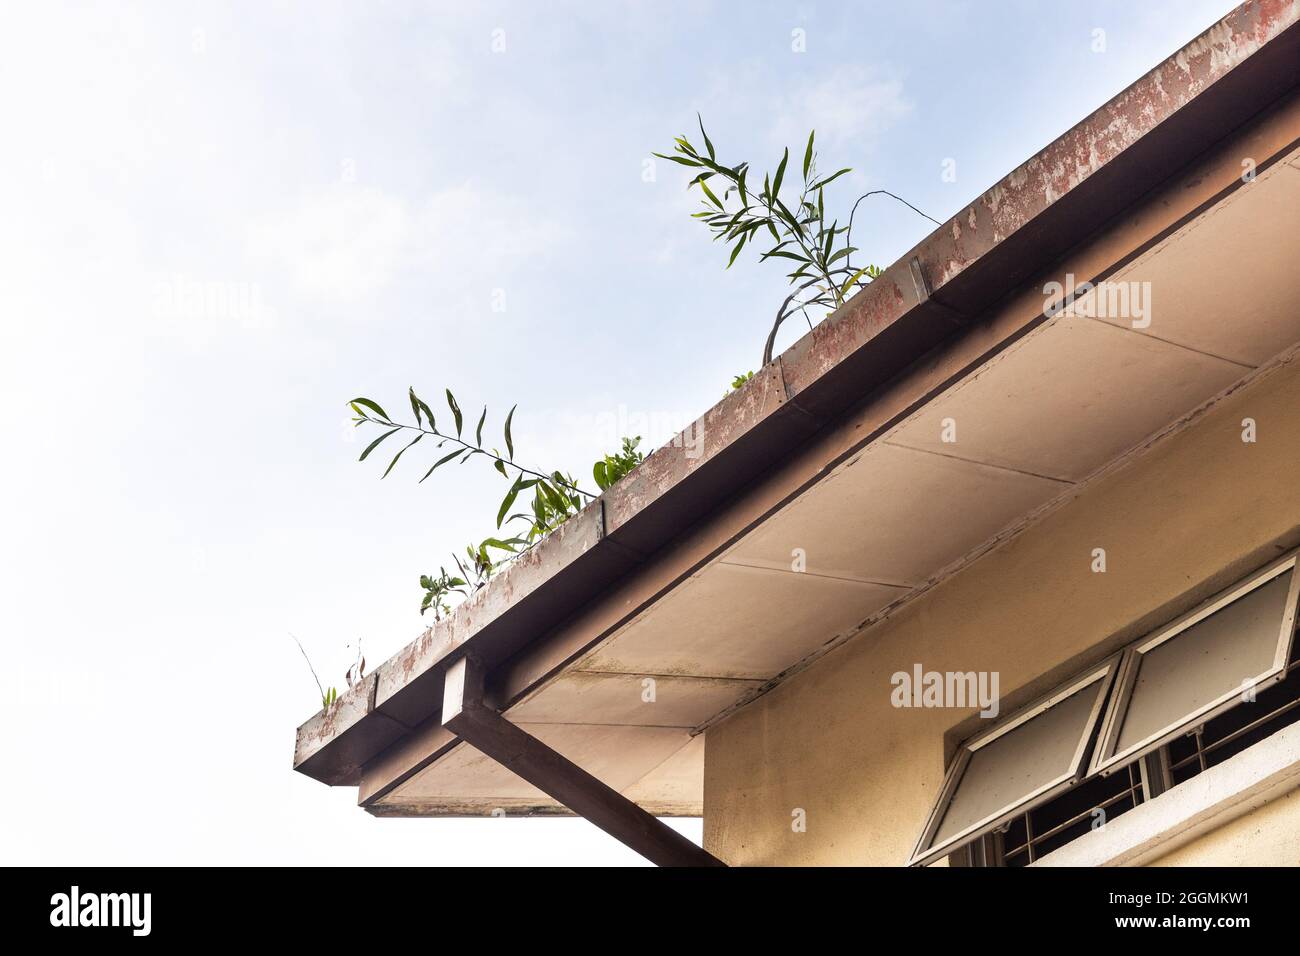 Clogged roof rain gutter full of dry leaf and plant growing in it with blue sky Stock Photo